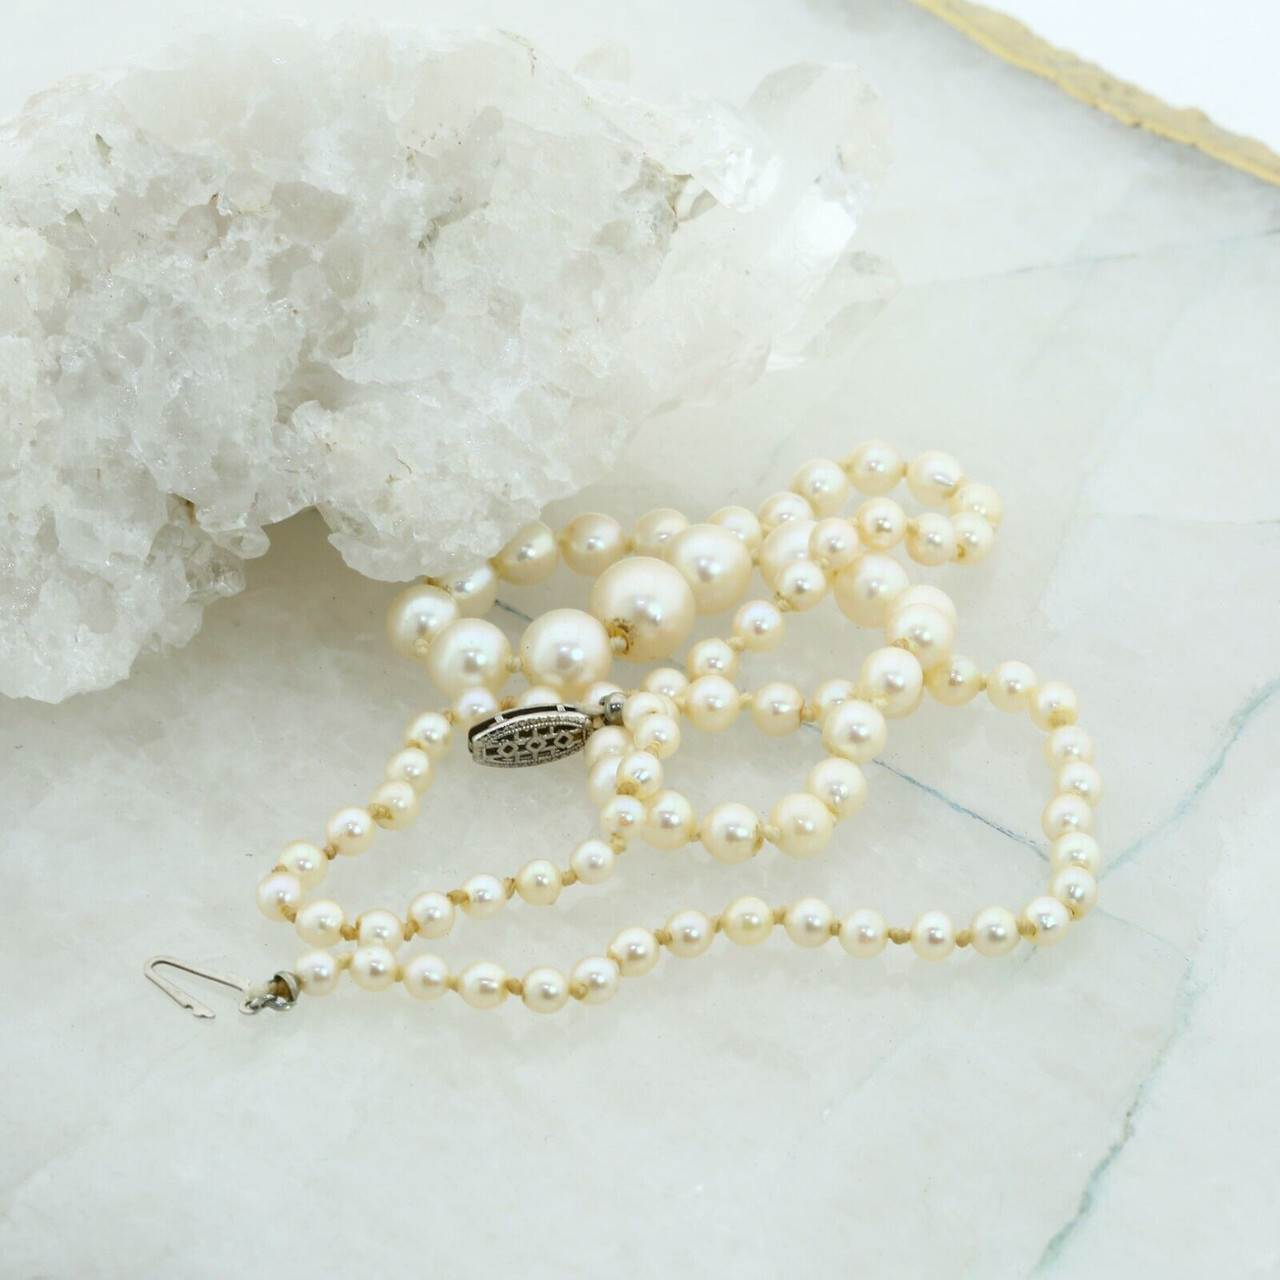 Triple Strand White Freshwater Pearl Necklace